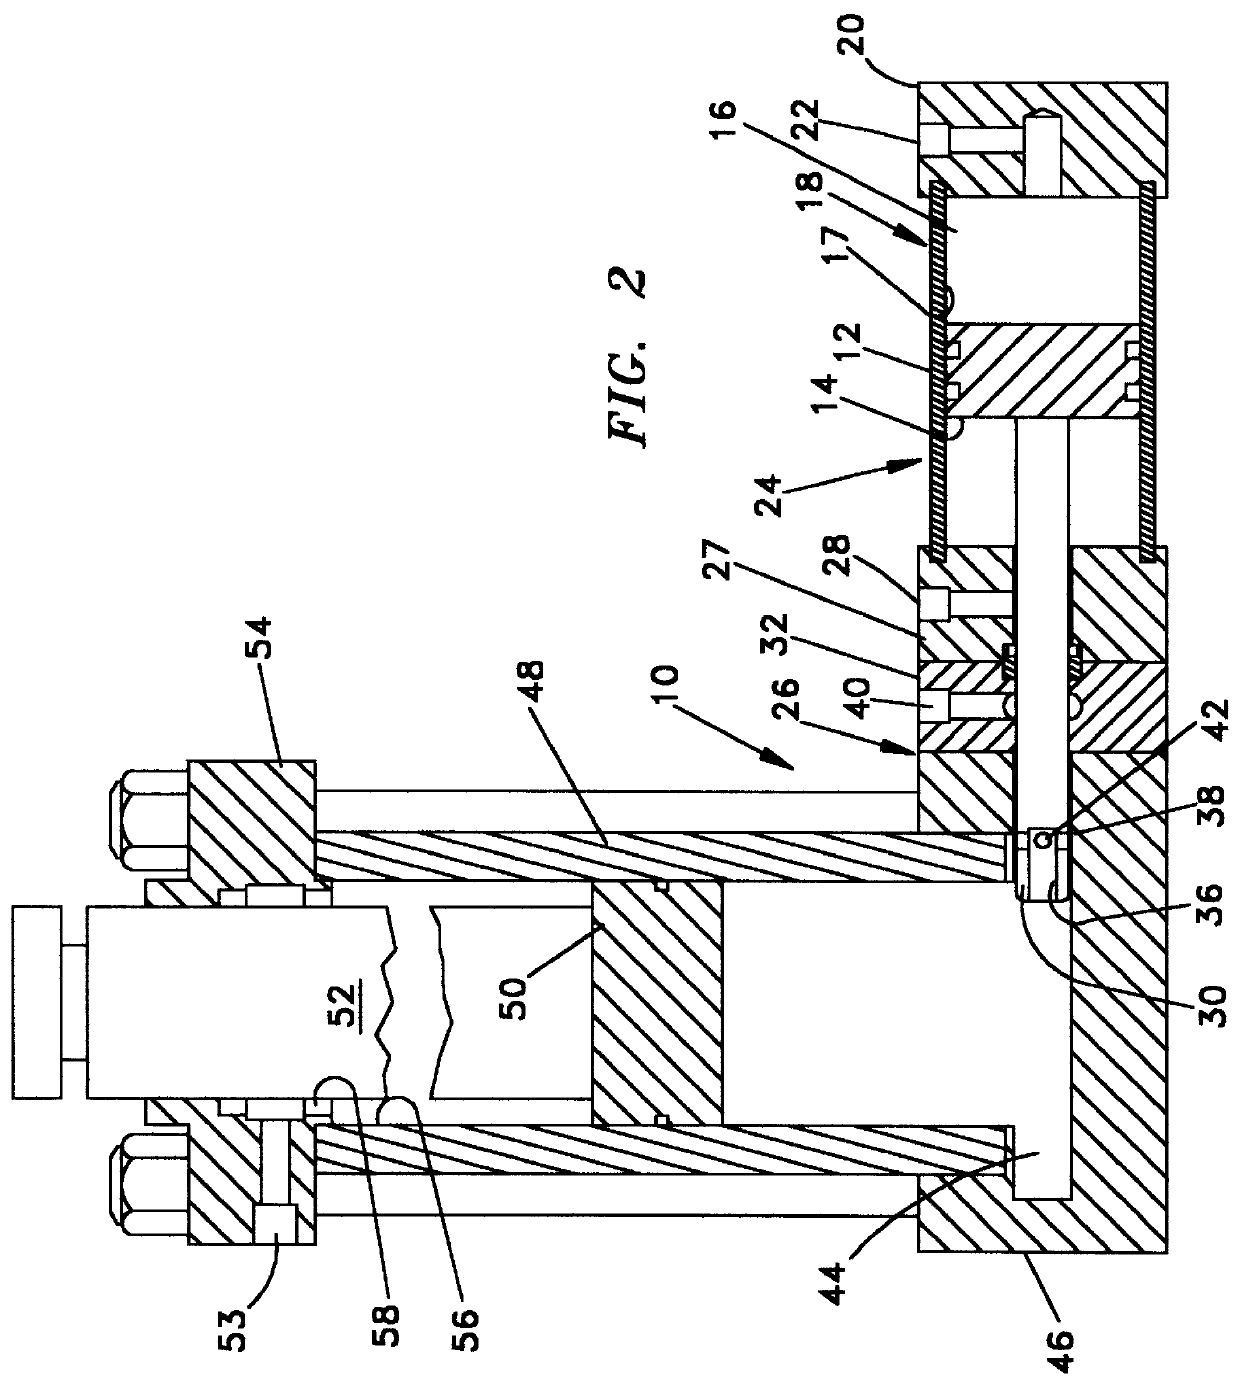 Fluid actuator system having means for internally increasing the fluid pressure therein